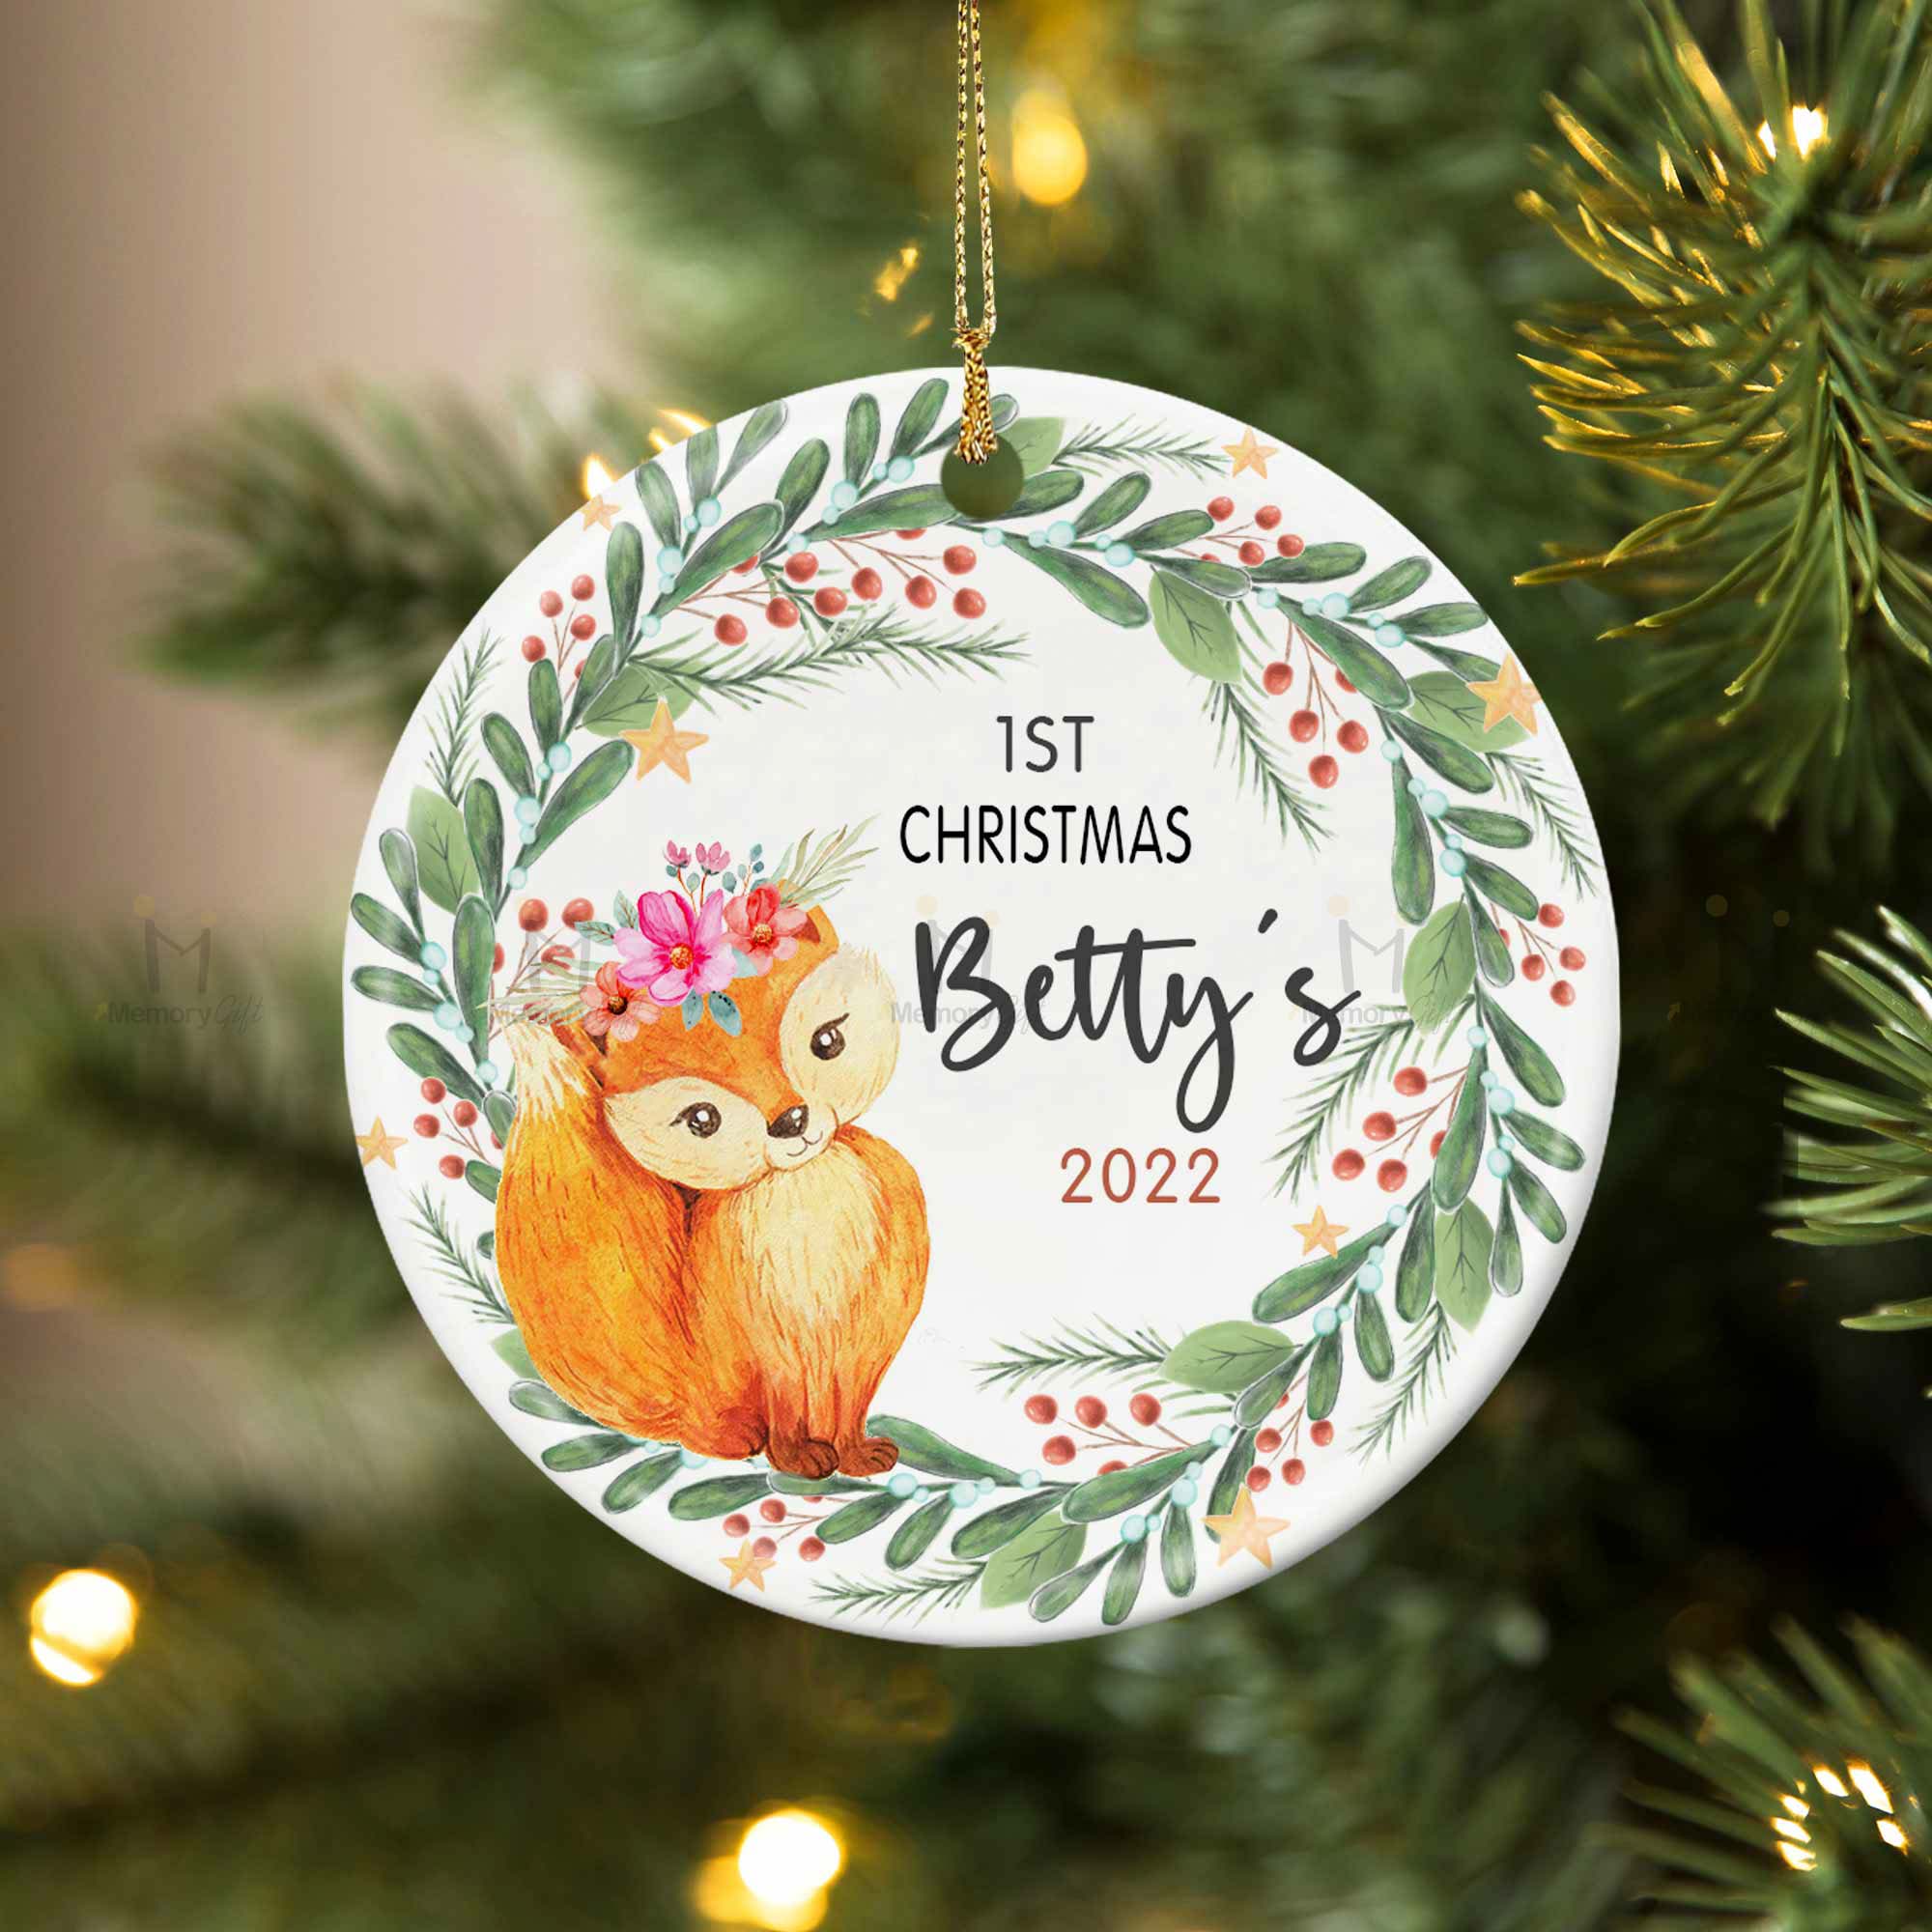 baby's 1st christmas ornament 